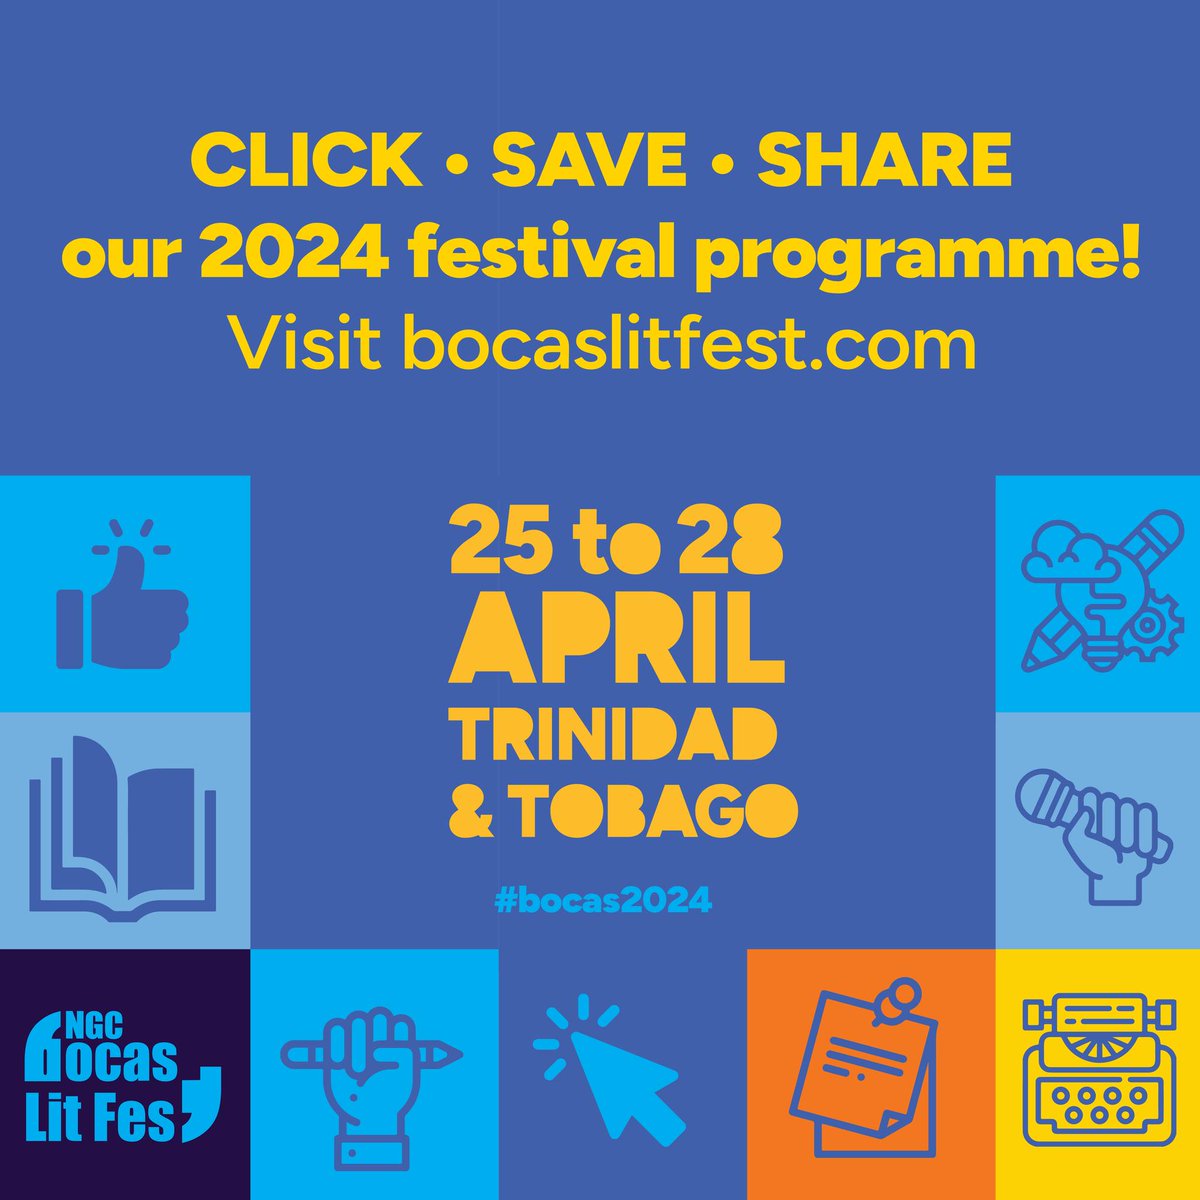 📚 Exciting news! The 14th annual NGC #BocasLitFest is back, celebrating Caribbean stories and voices from 25 - 28 April. Join in-person or online for readings, discussions, performances, and more with over 150 talented creatives. Full programme: bocaslitfest.com/festival/progr…